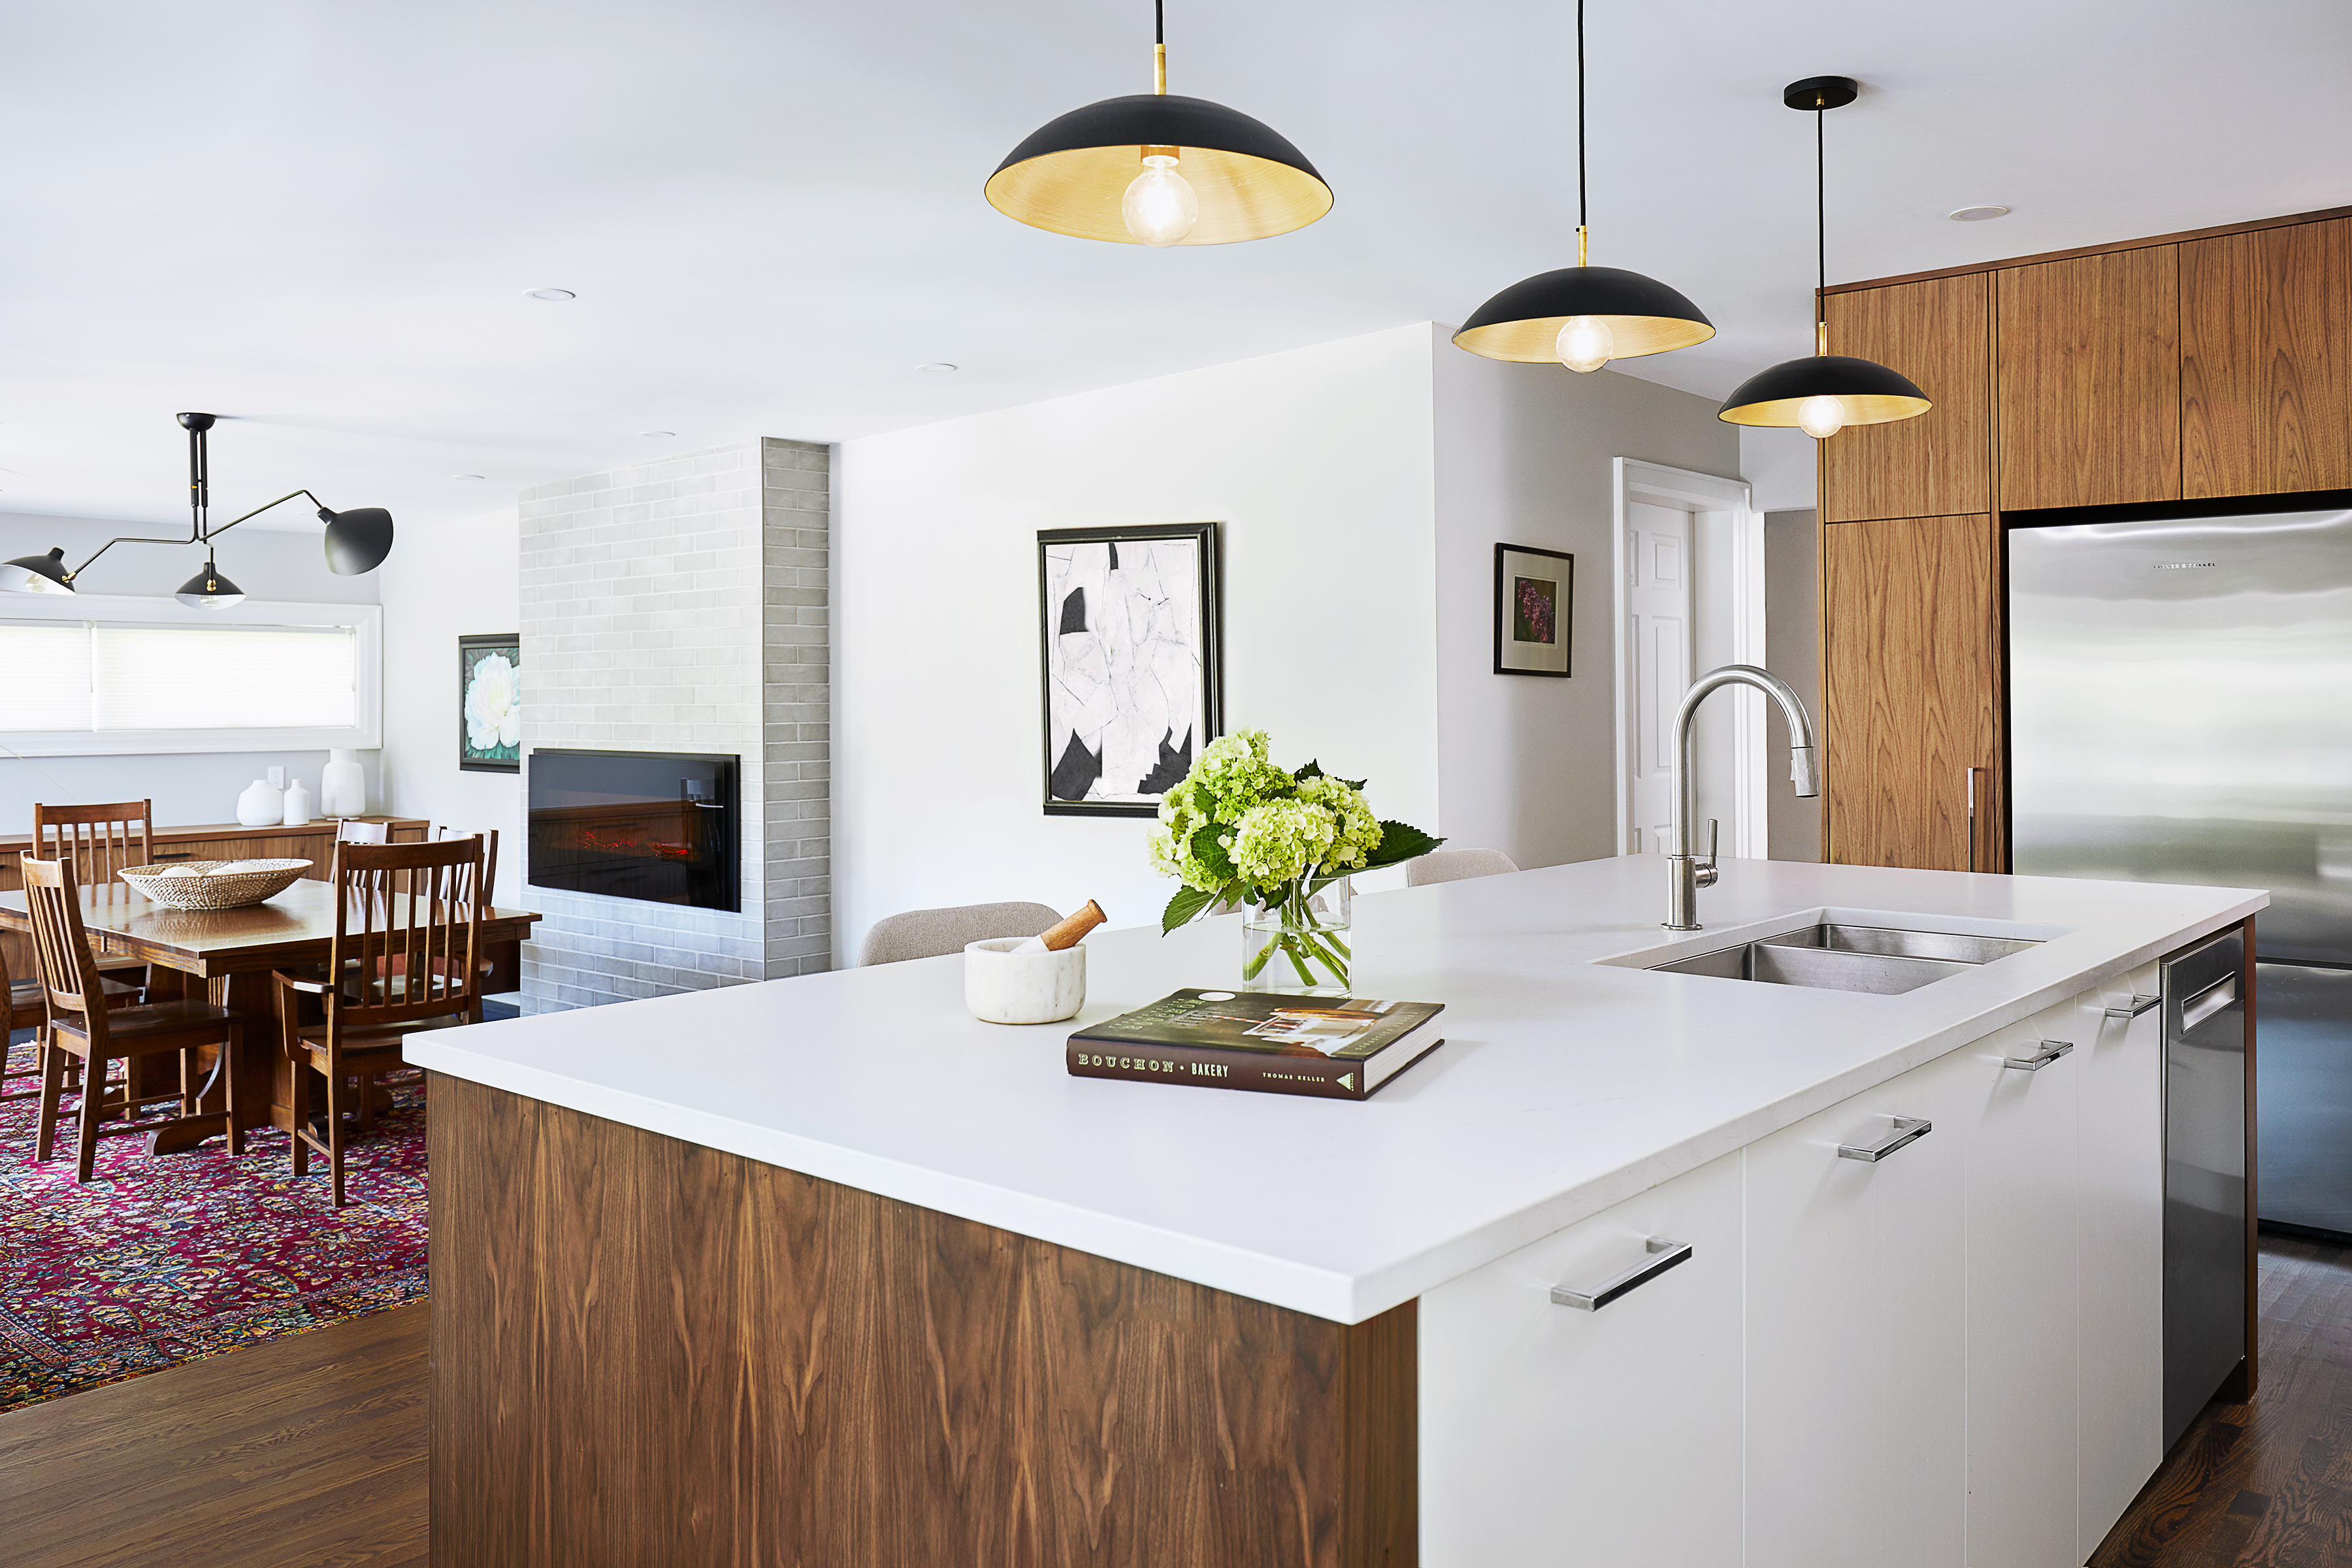 Looking Ahead to Hosting Again | Chervin Kitchen & Bath | Open-Concept Kitchen & Dining Area